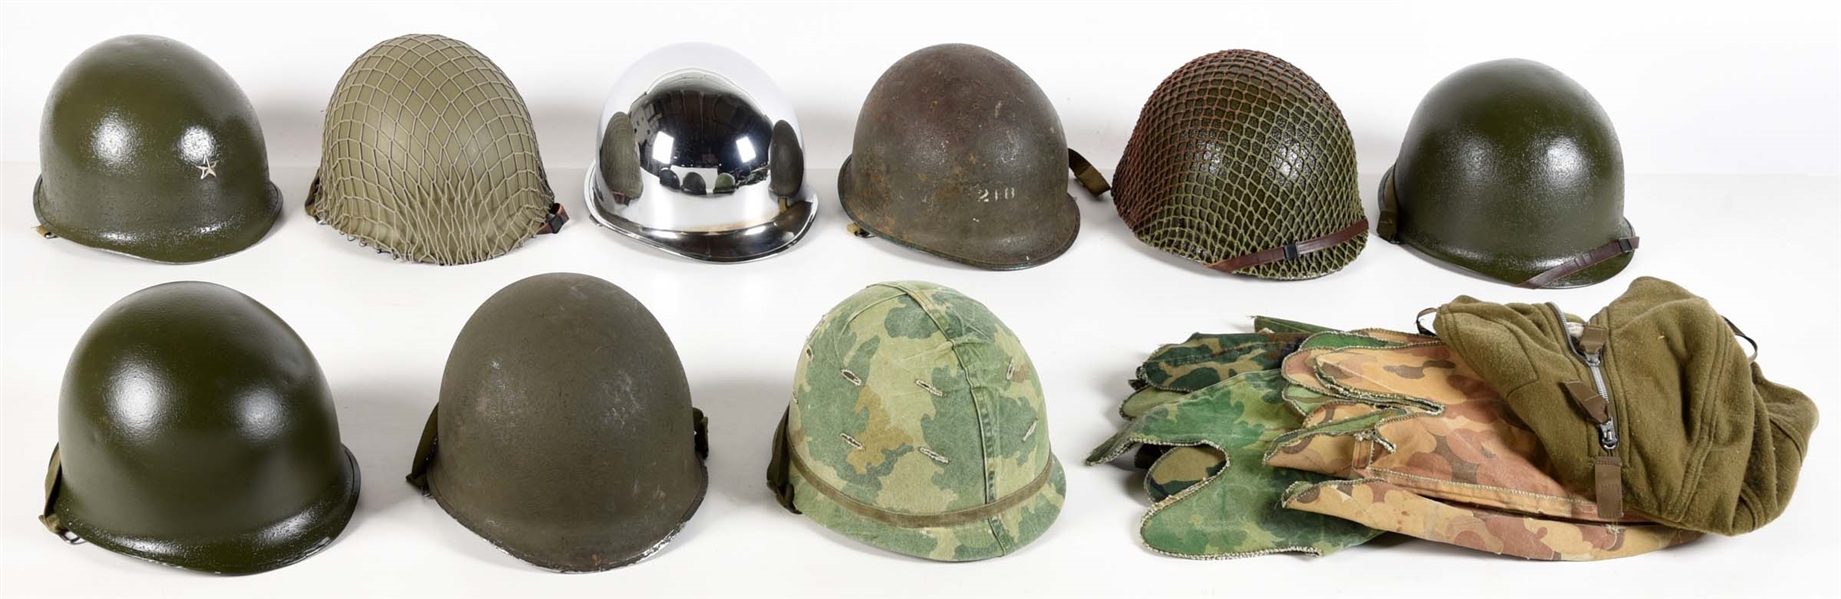 LOT OF US WWII-VIETNAM WAR M1 HELMETS WITH LINERS AND COVERS.